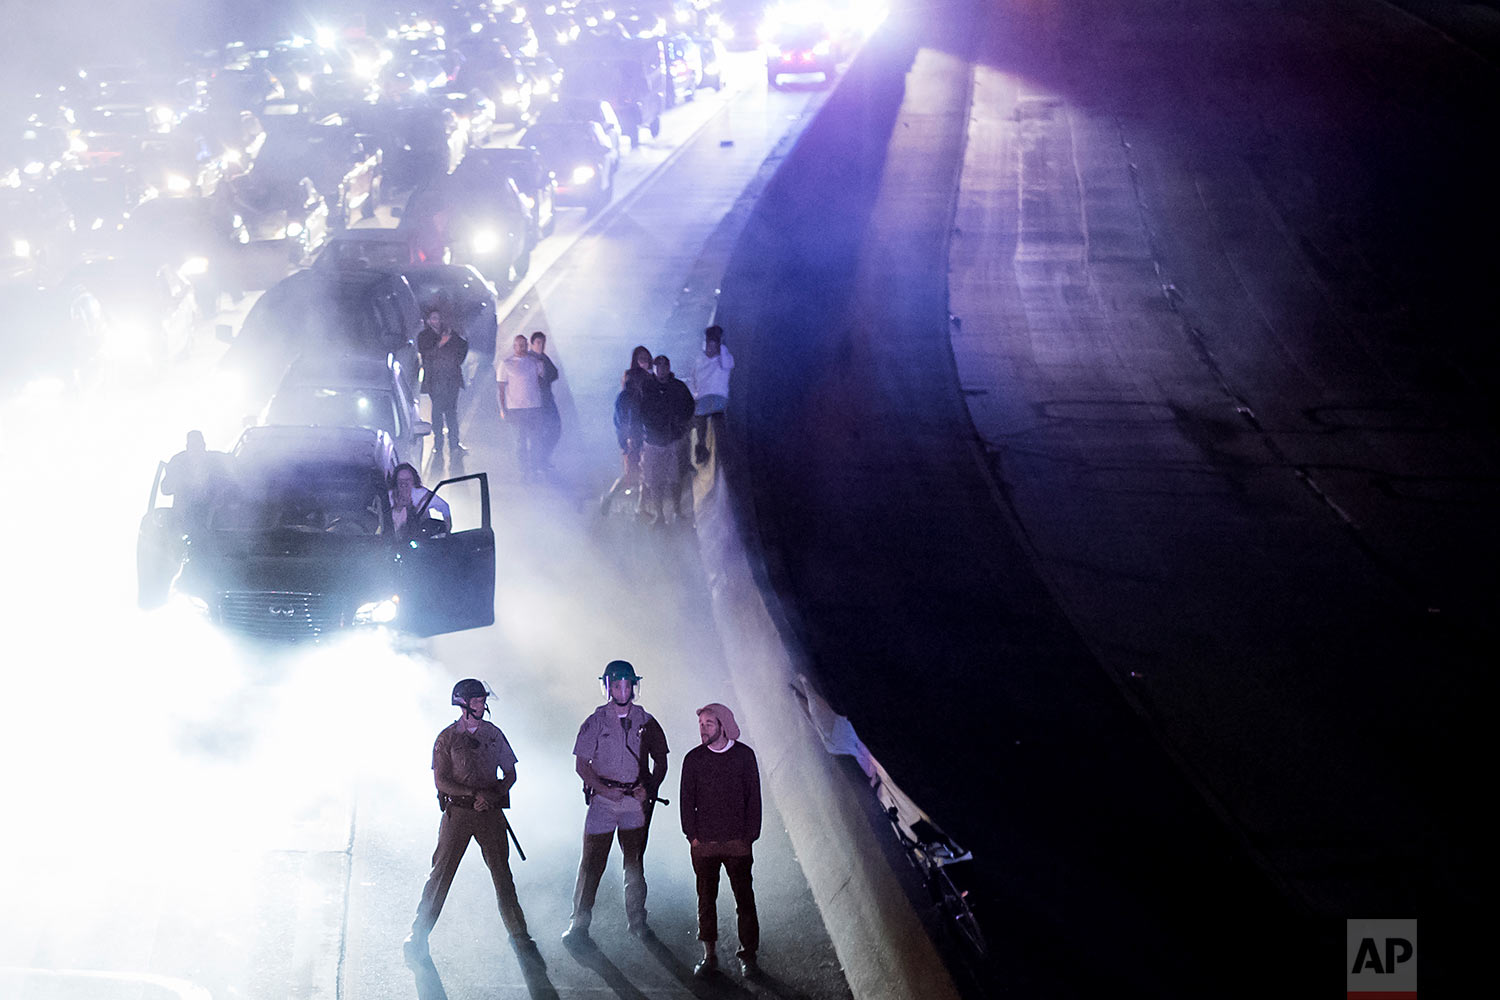  Police officers stand watch as protesters against racism block traffic on both directions of Interstate 580 in Oakland, Calif., Saturday, Aug. 12, 2017. (AP Photo/Noah Berger) 